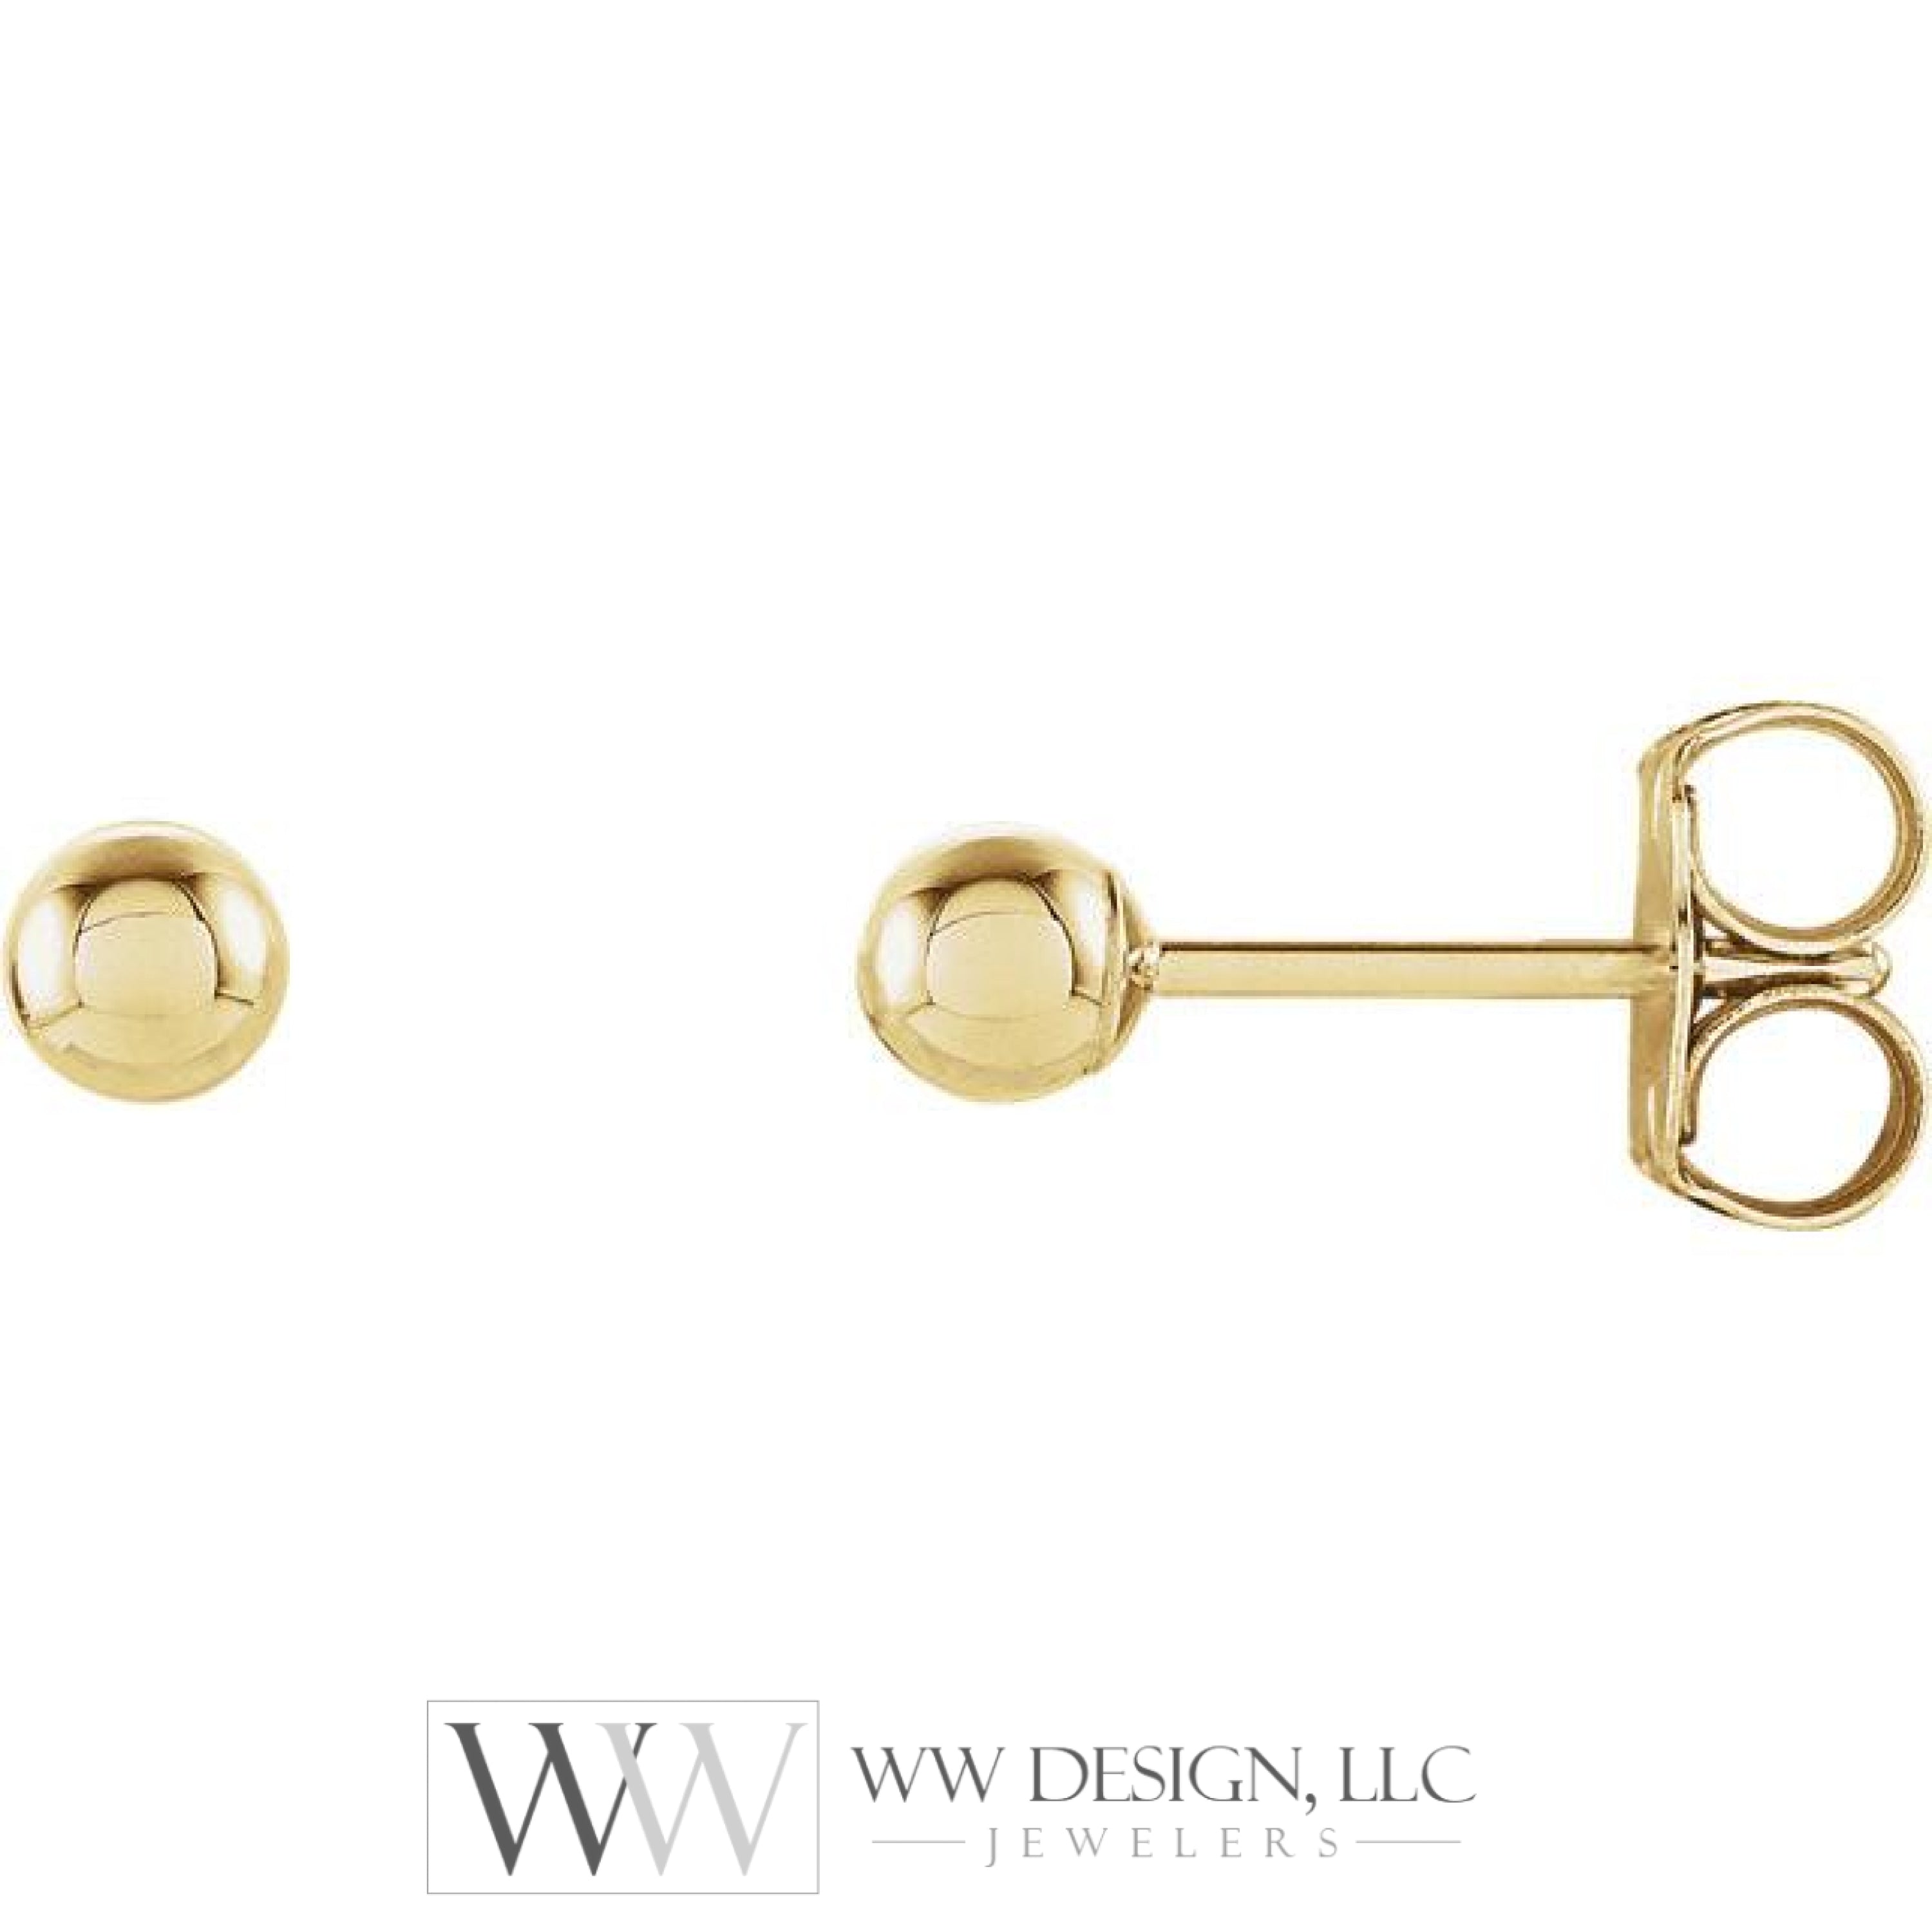 3mm Ball Earrings with Bright Finish - 14K Gold (Yellow or White)